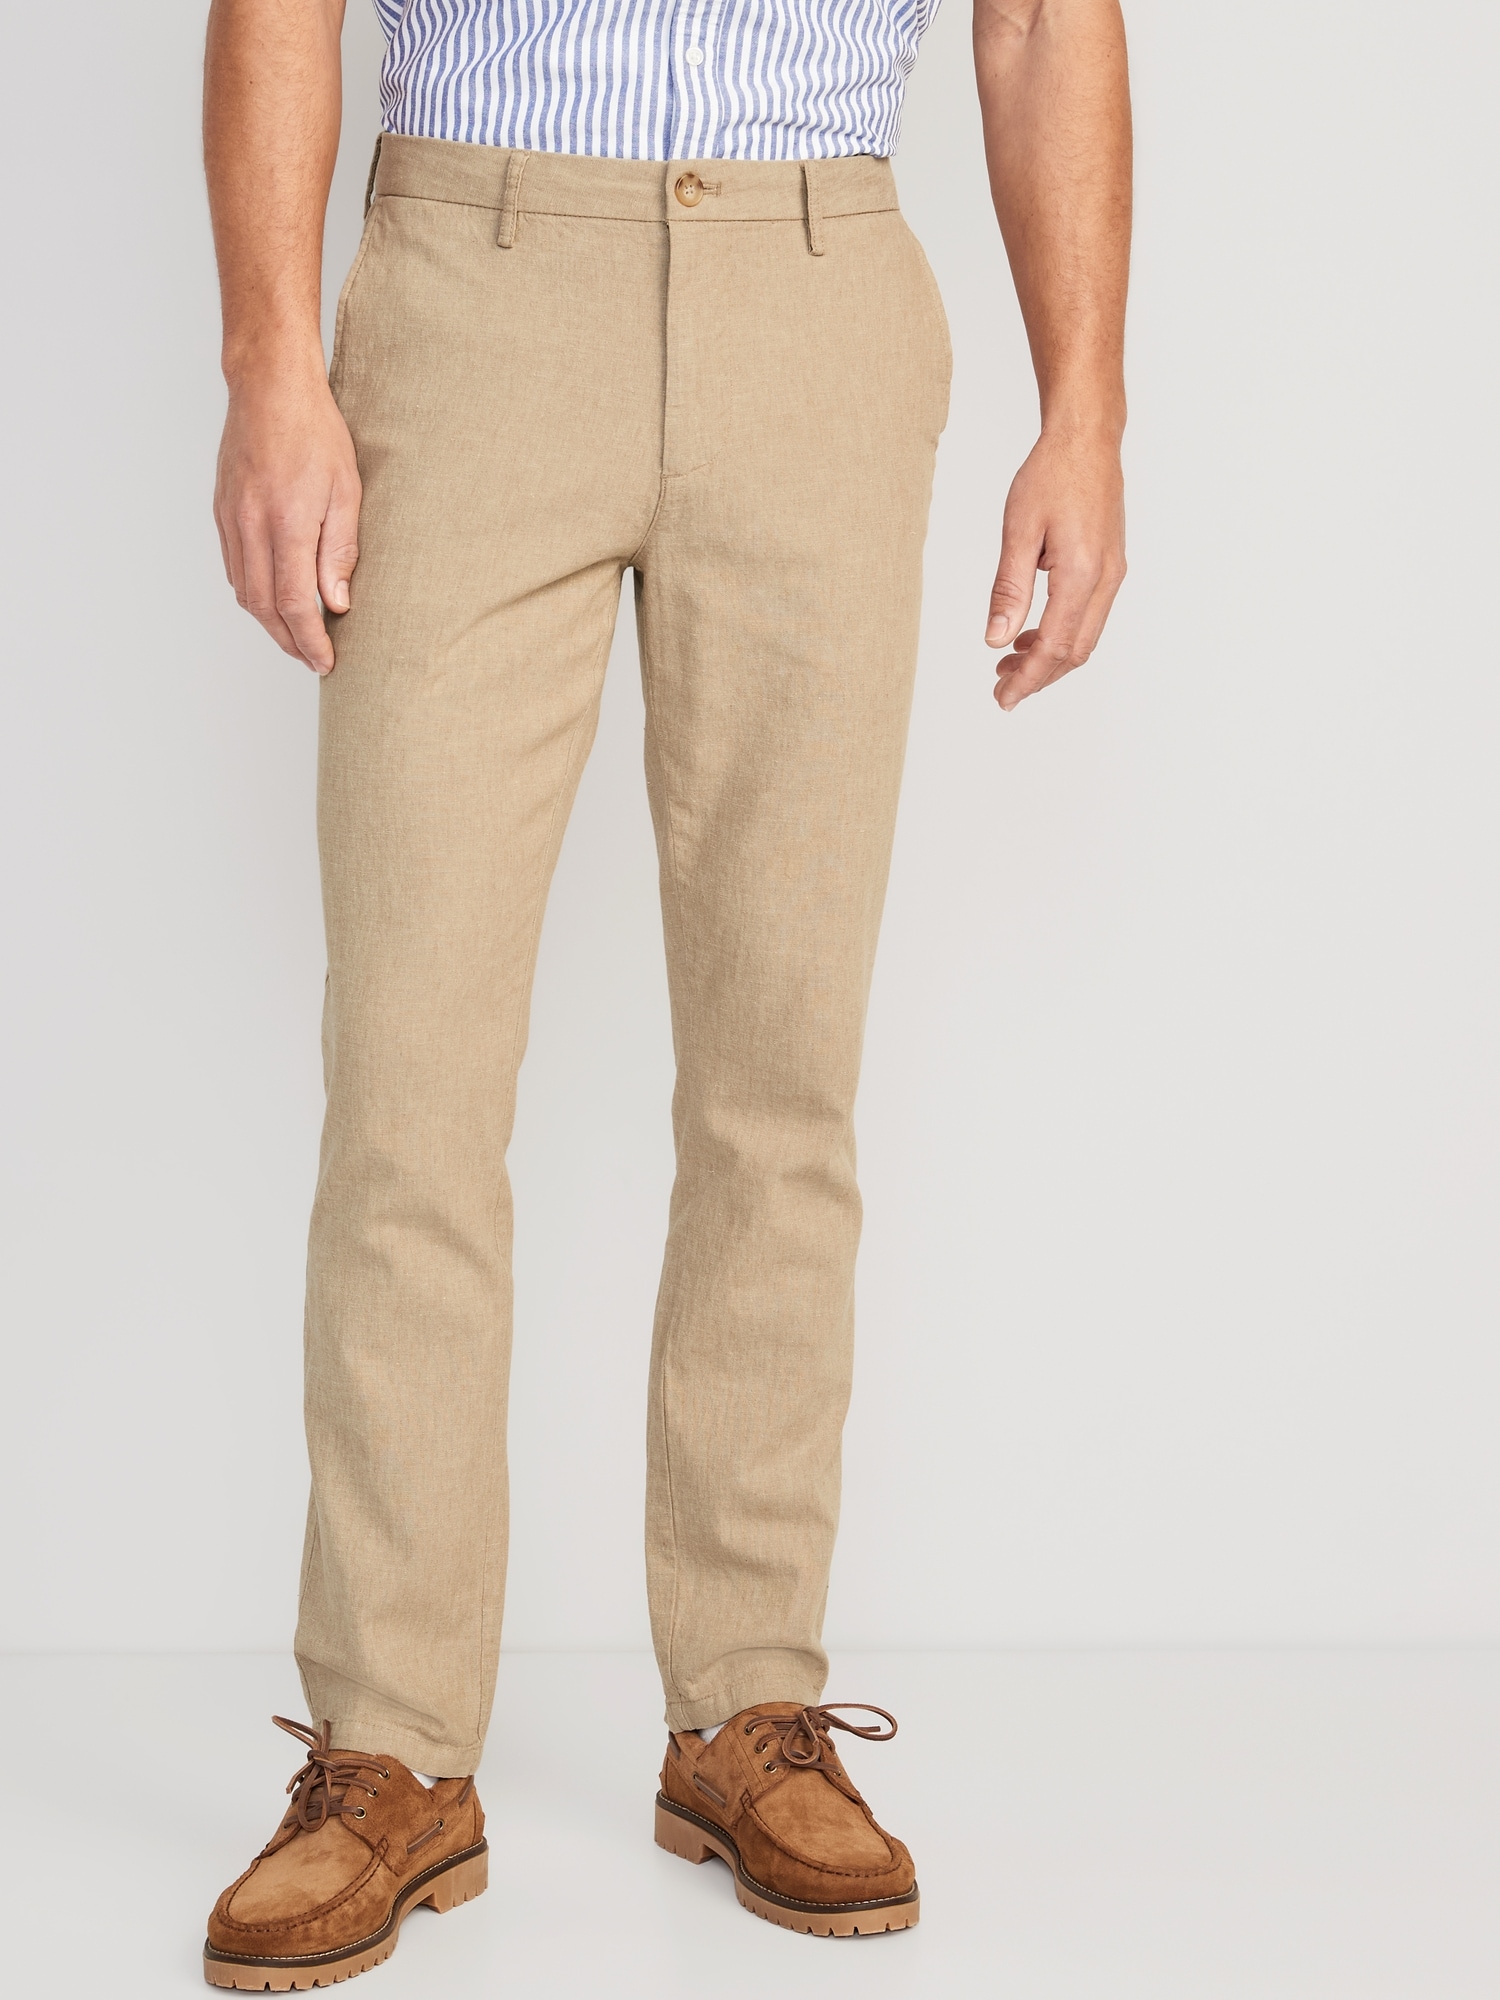 Straight BuiltIn Flex Ultimate Tech Chino Pants for Men  Old Navy